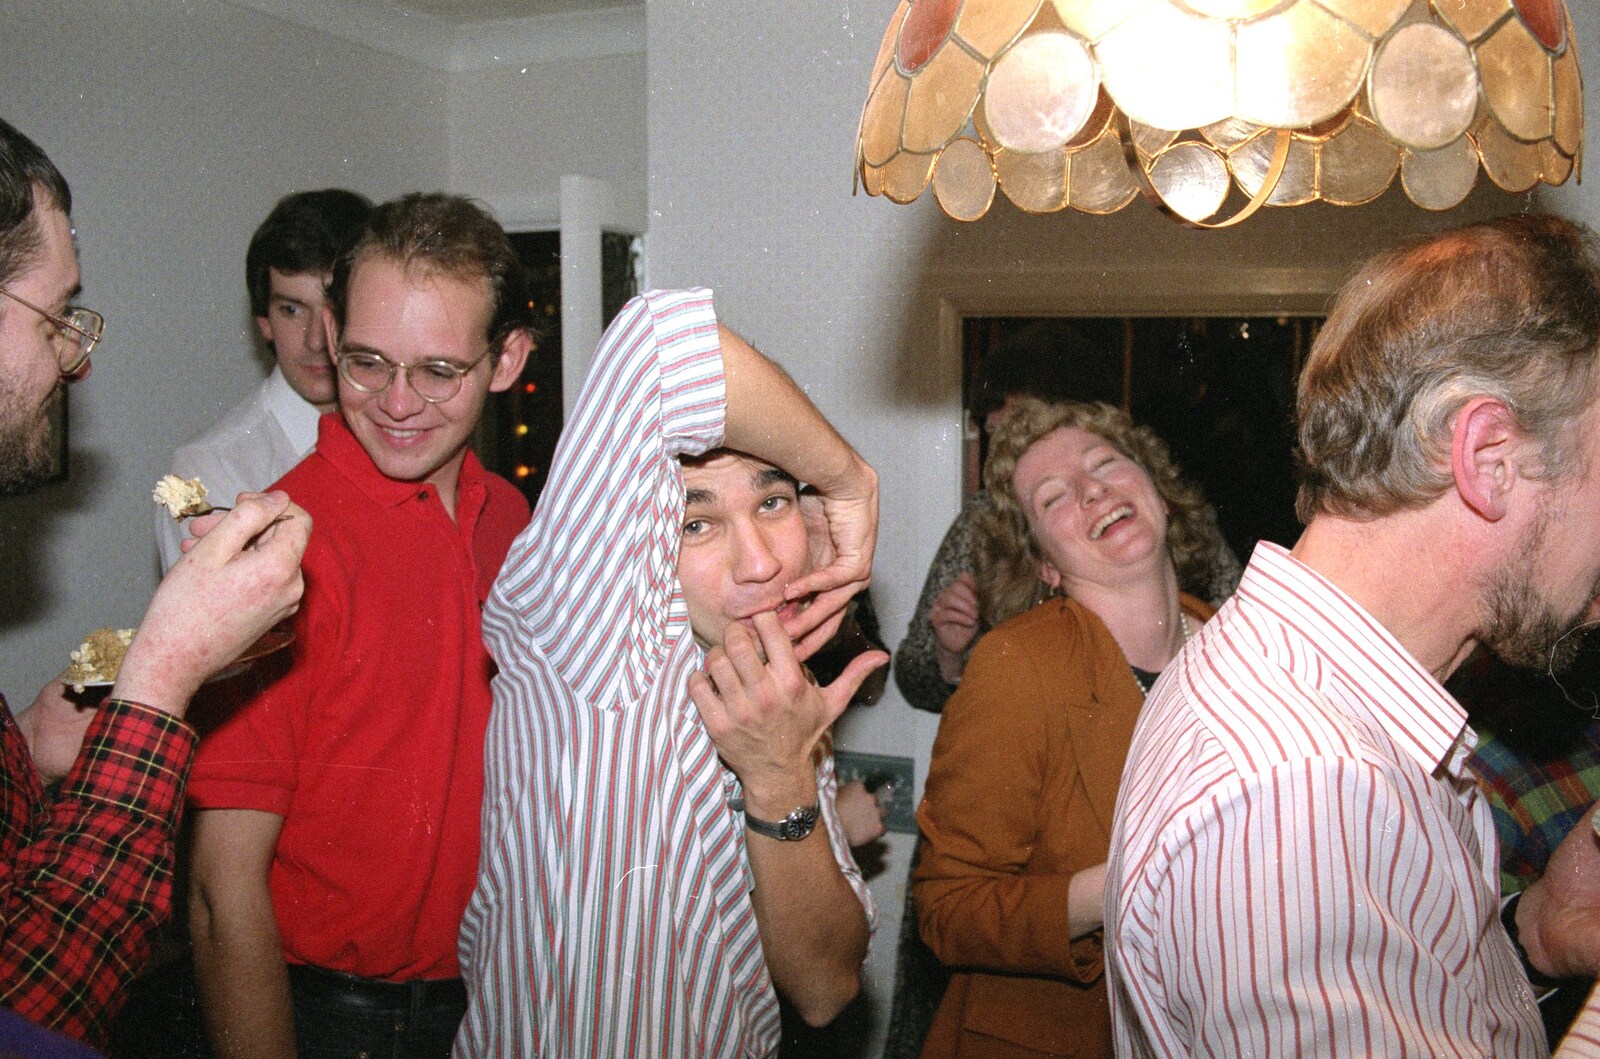 Nigel Mukherjee does a bit of gurning from New Year's Eve at Phil's, Hordle, Hampshire - 31st December 1990